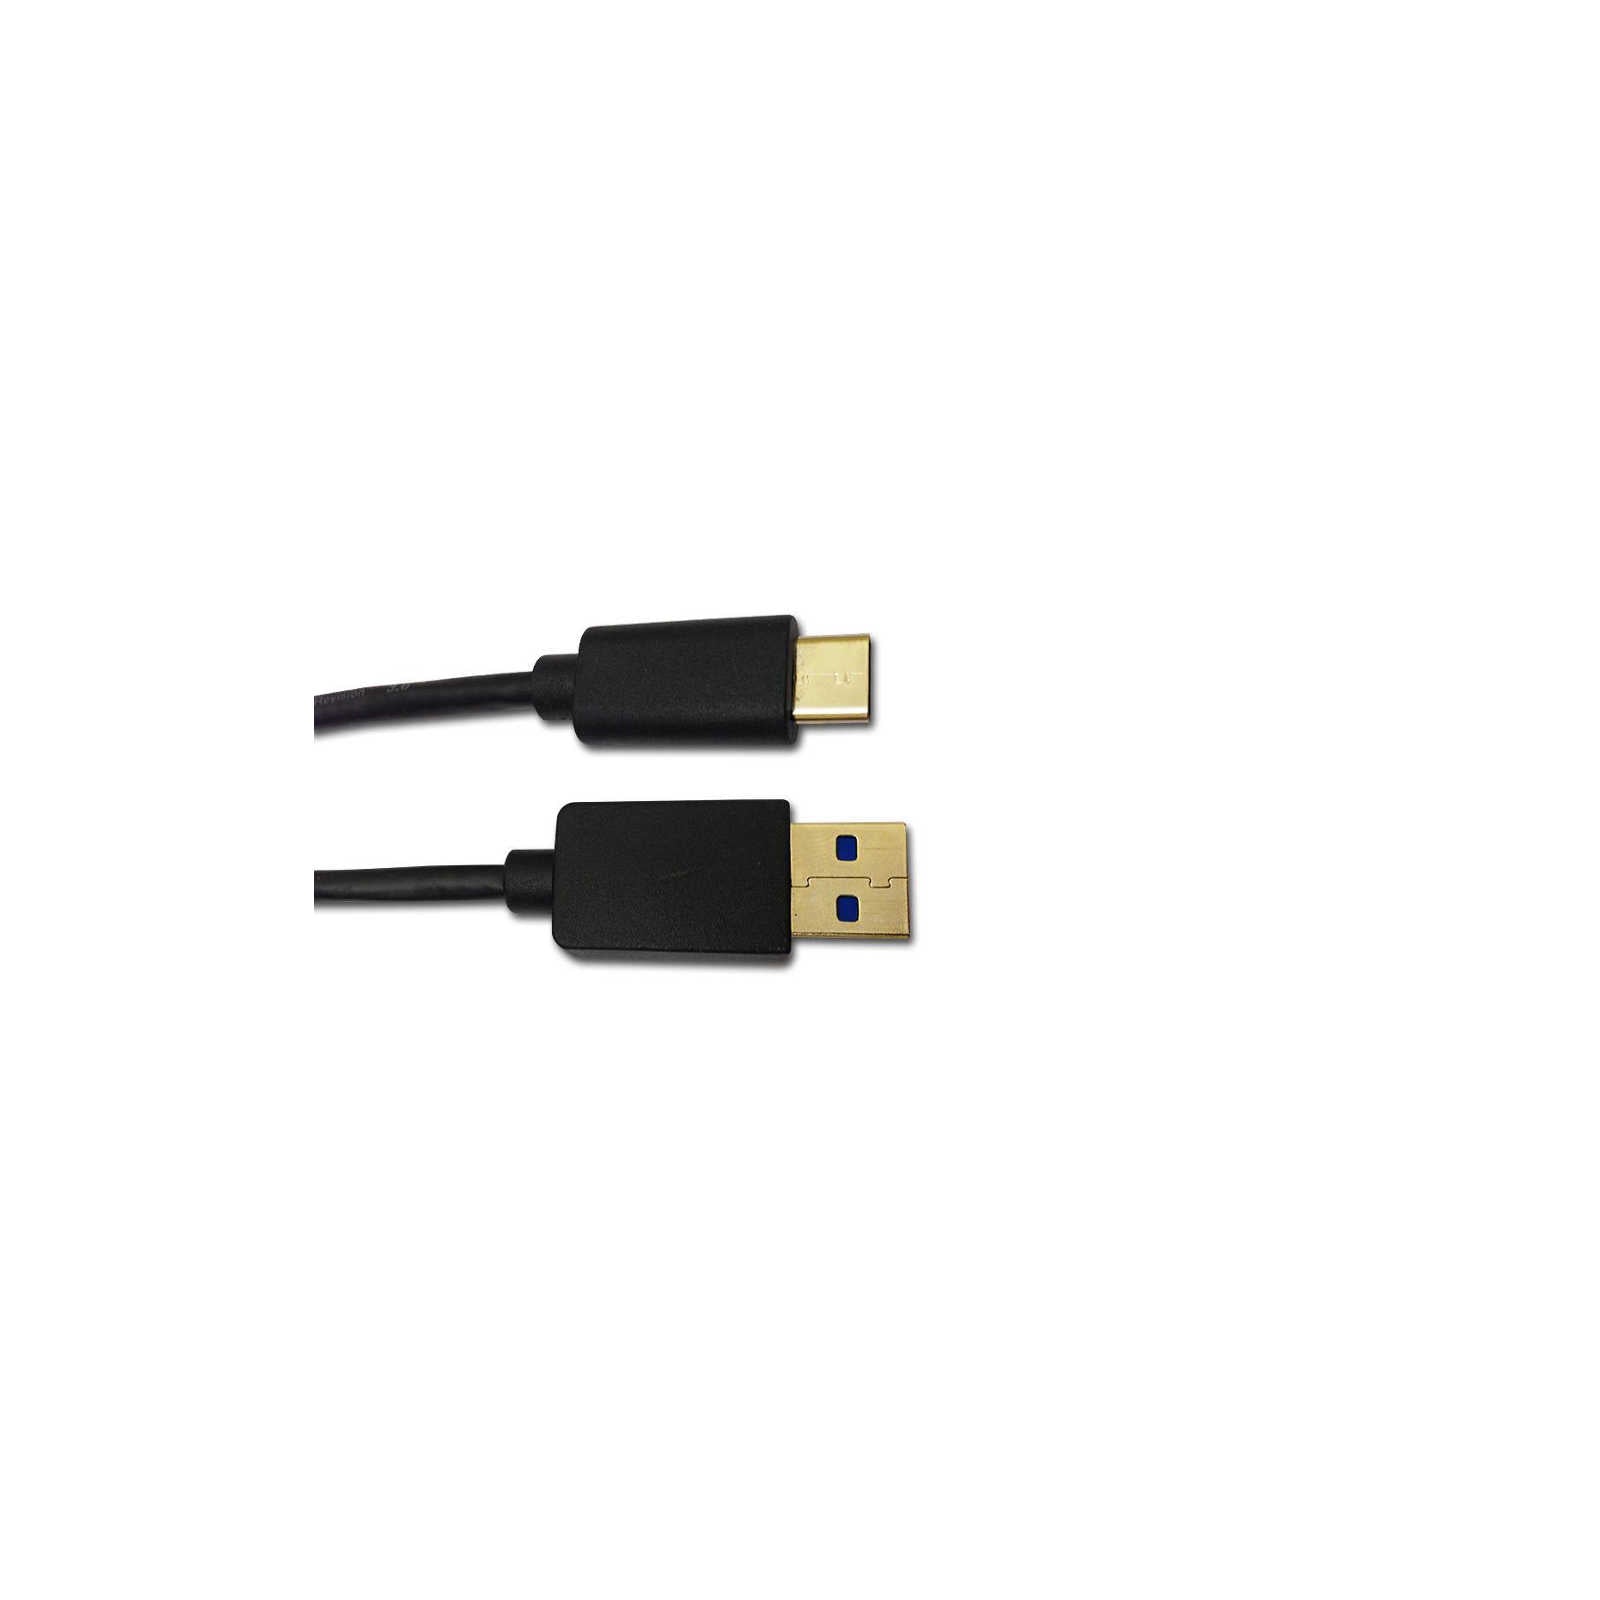 Lucido USB 3.1 Type-C Male to USB 3.0 Type-A Male 1 meter Cable - Ooberpad